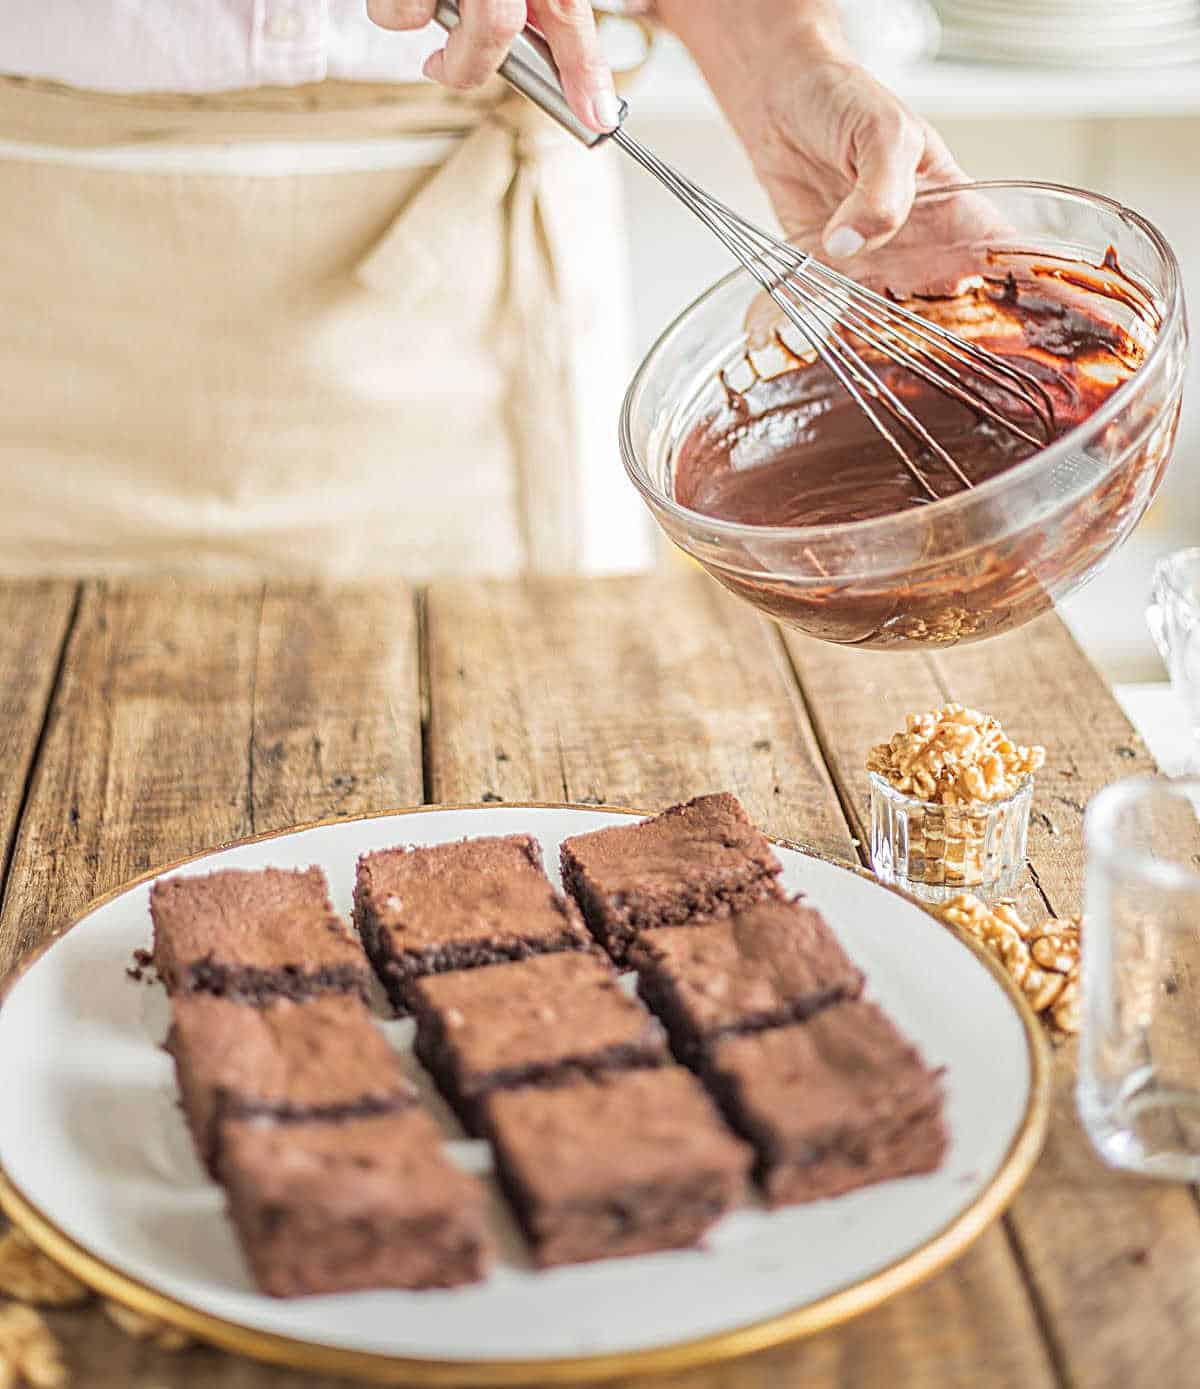 Whisking chocolate sauce in a glass bowl; a plate of brownies below on a wooden table.